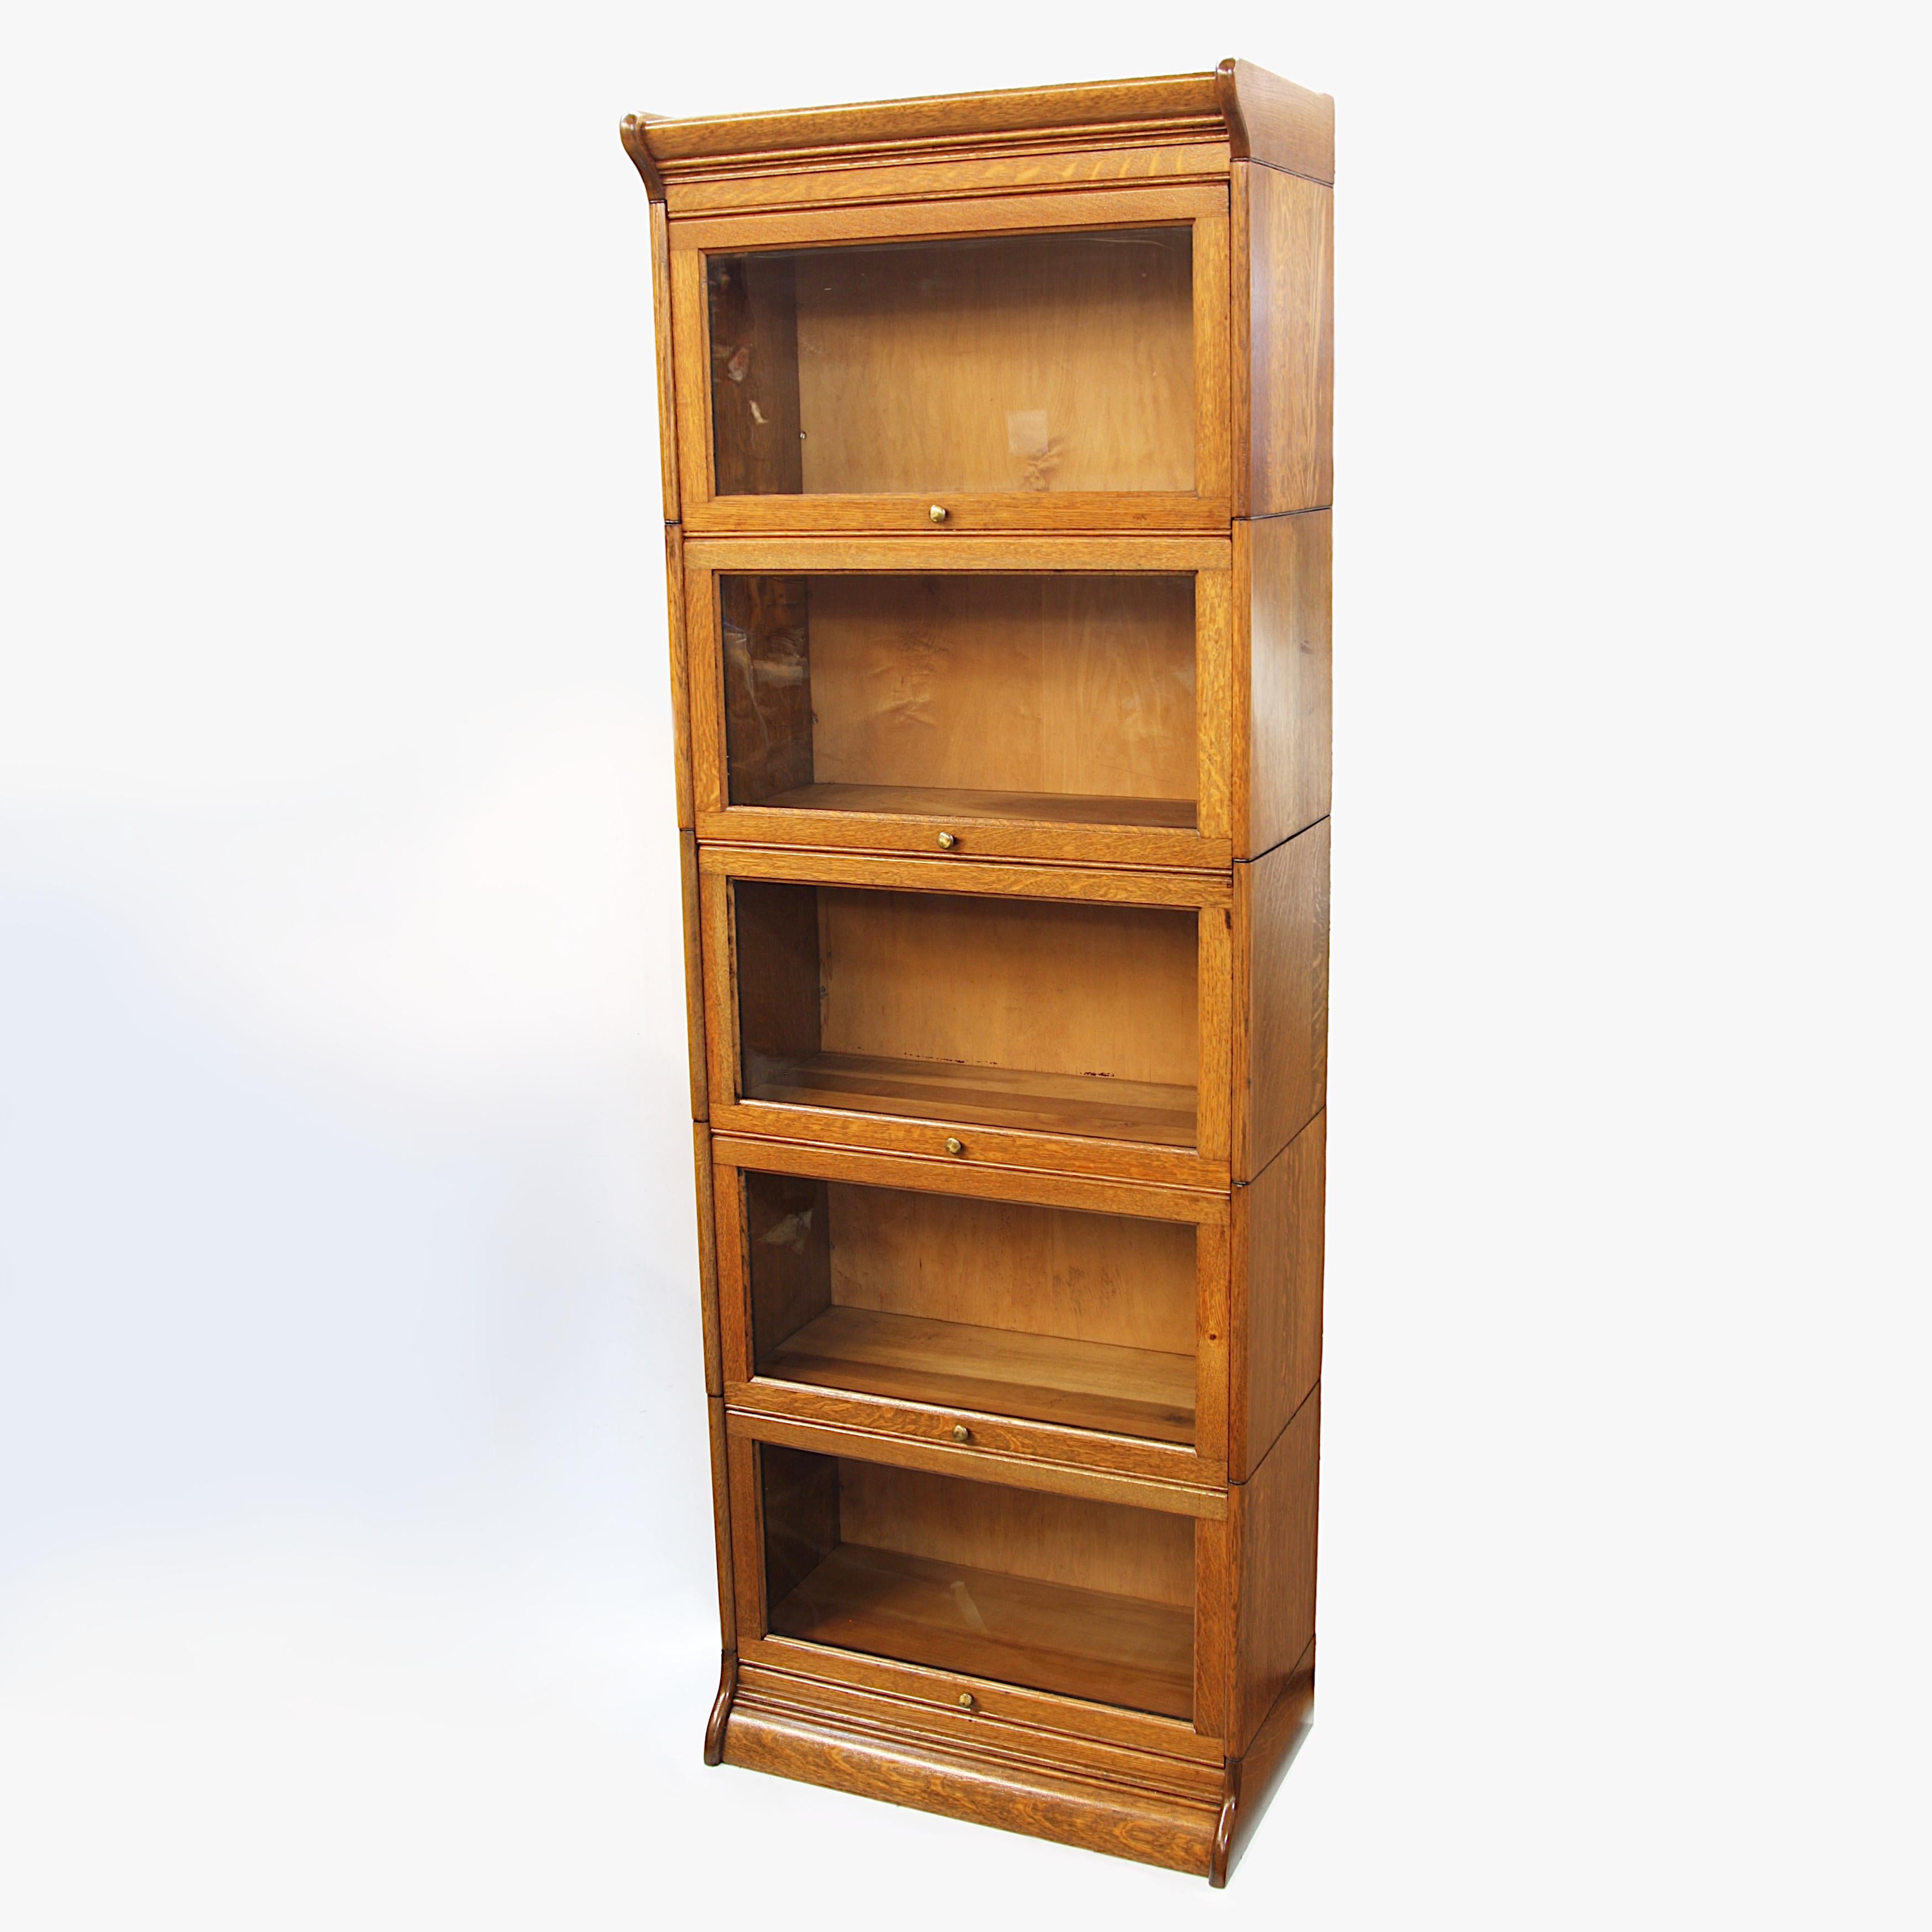 Fantastic vintage quarter-sawn oak barrister bookcase made by Gunn. Bookcase stands over 6 feet tall and features an unusual 26